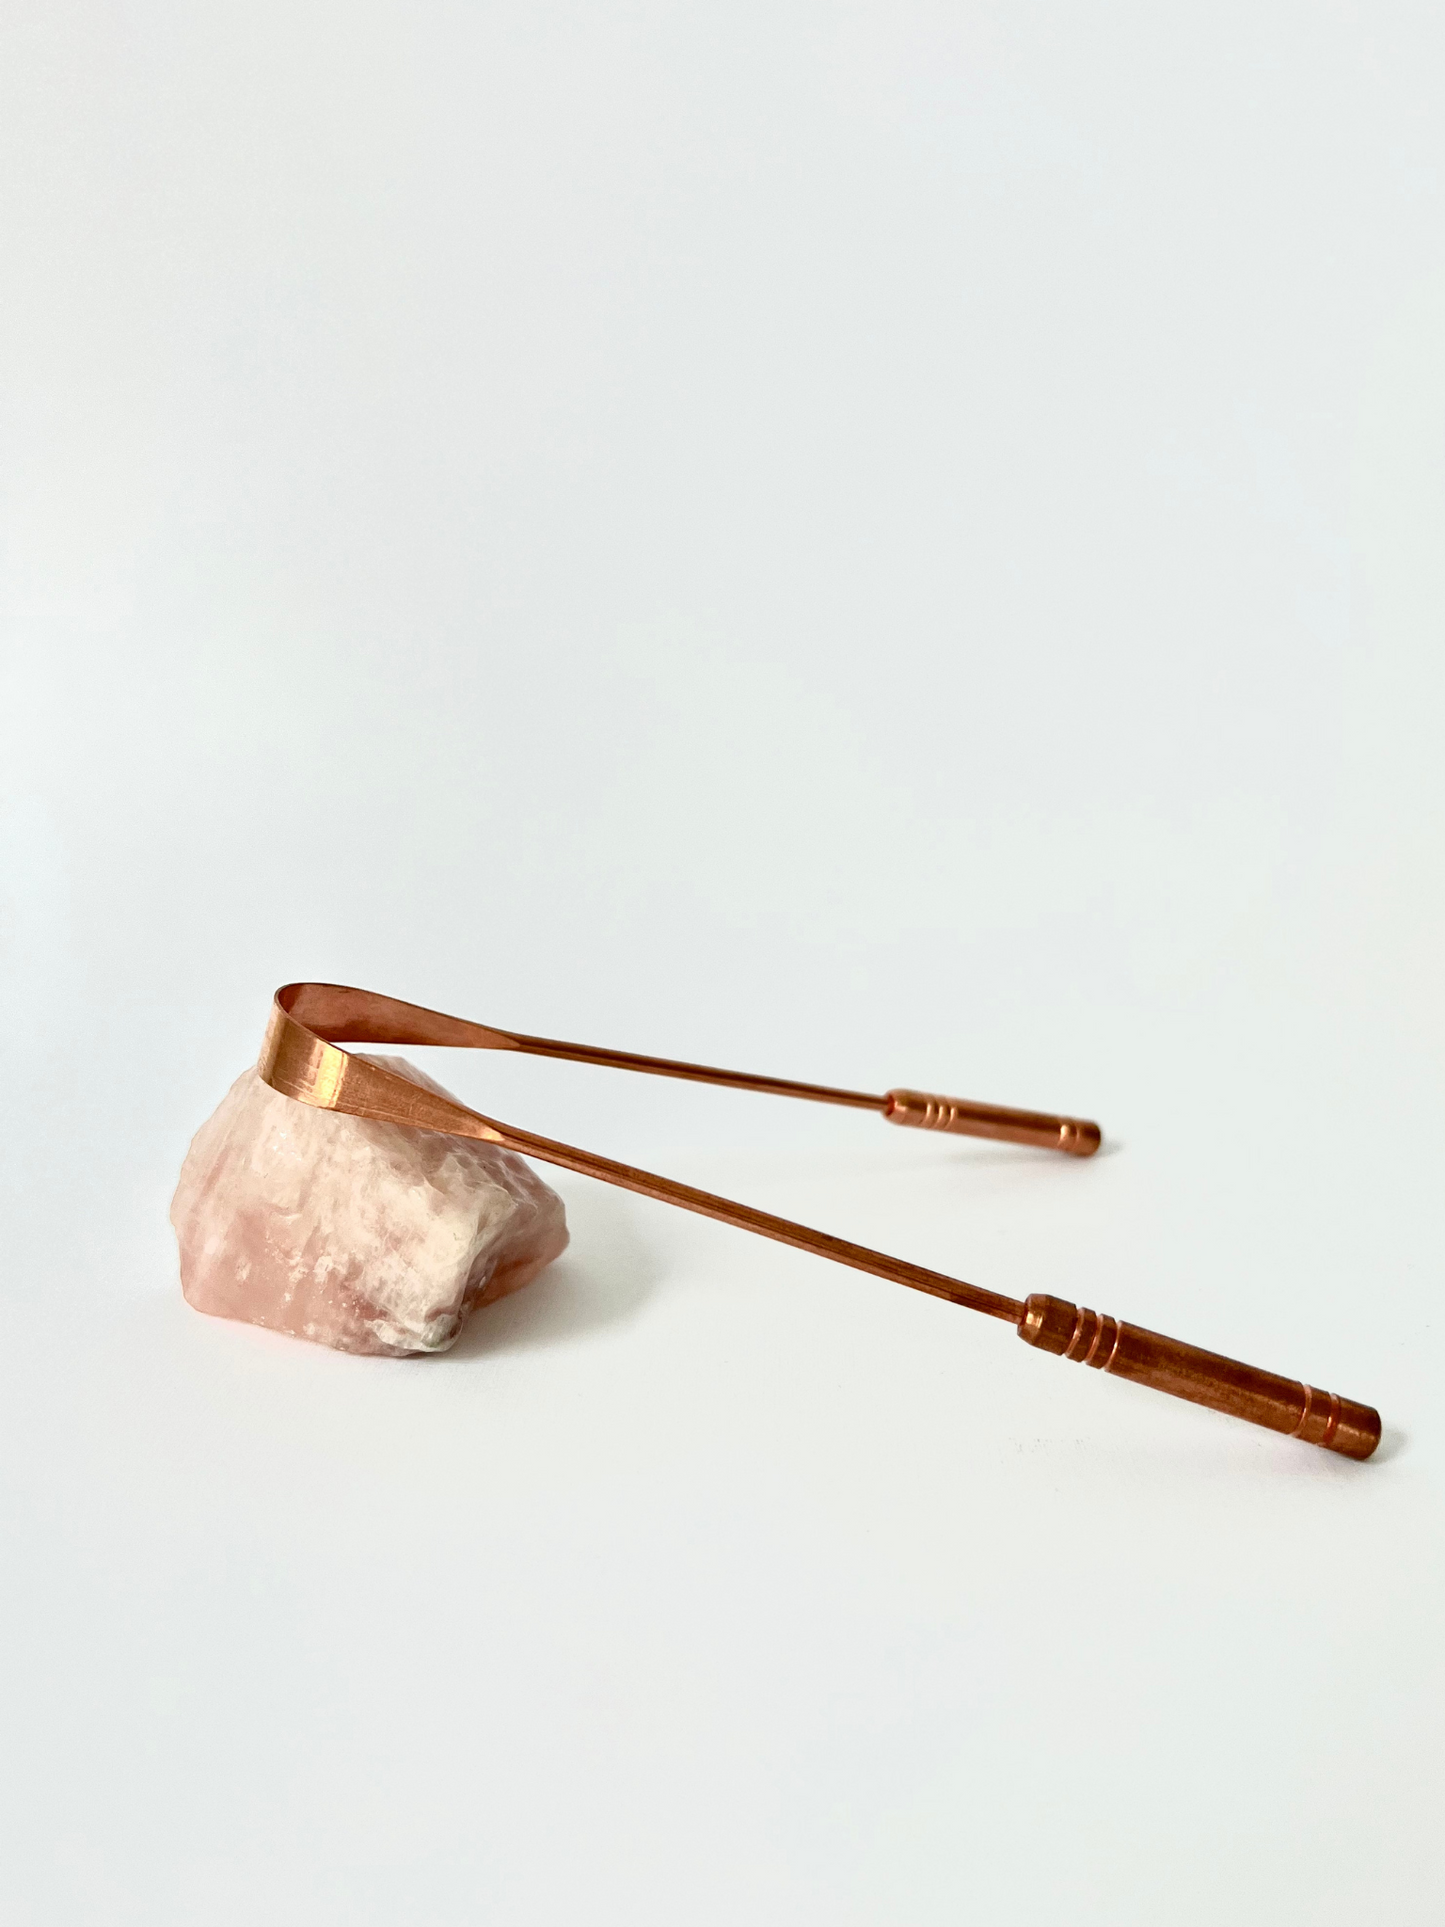 Good Karma Ayurvedic Copper Tongue Scraper Cleaner for Oral health on rose crystal stone